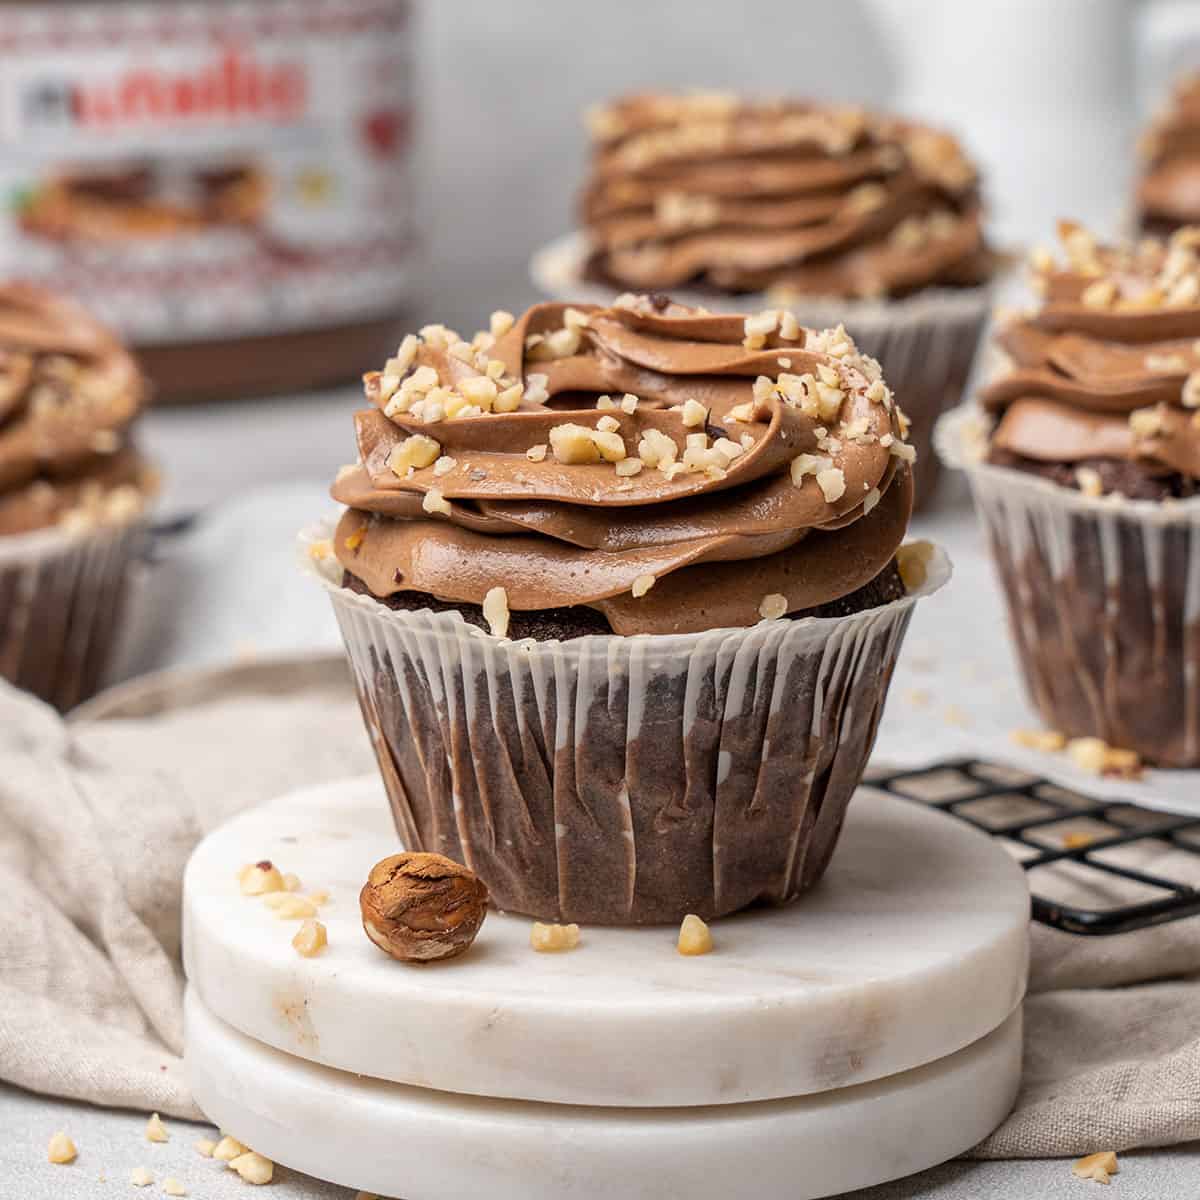 <p>These <a href="https://www.spatuladesserts.com/nutella-cupcakes/">Nutella cupcakes</a> are a chocolate lover's dream. Deliciously flavored, perfectly moist, and filled with creamy Nutella spread, this chocolate hazelnut cupcakes recipe is an indulgent dessert fit for any occasion.</p> <p><strong>Recipe: <a href="https://www.spatuladesserts.com/nutella-cupcakes/">Nutella cupcakes</a></strong></p>